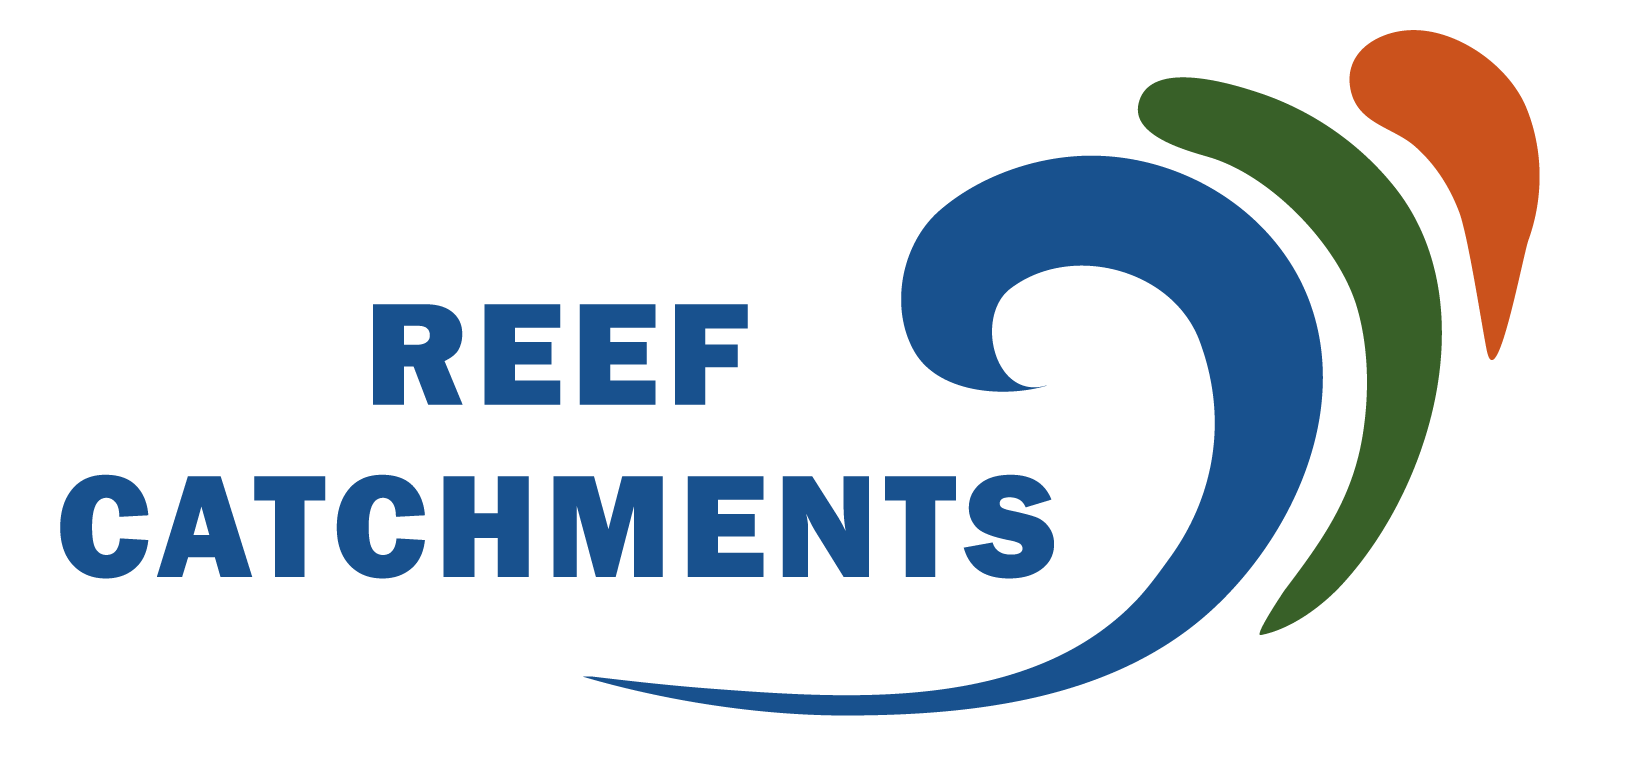 Reef Catchments